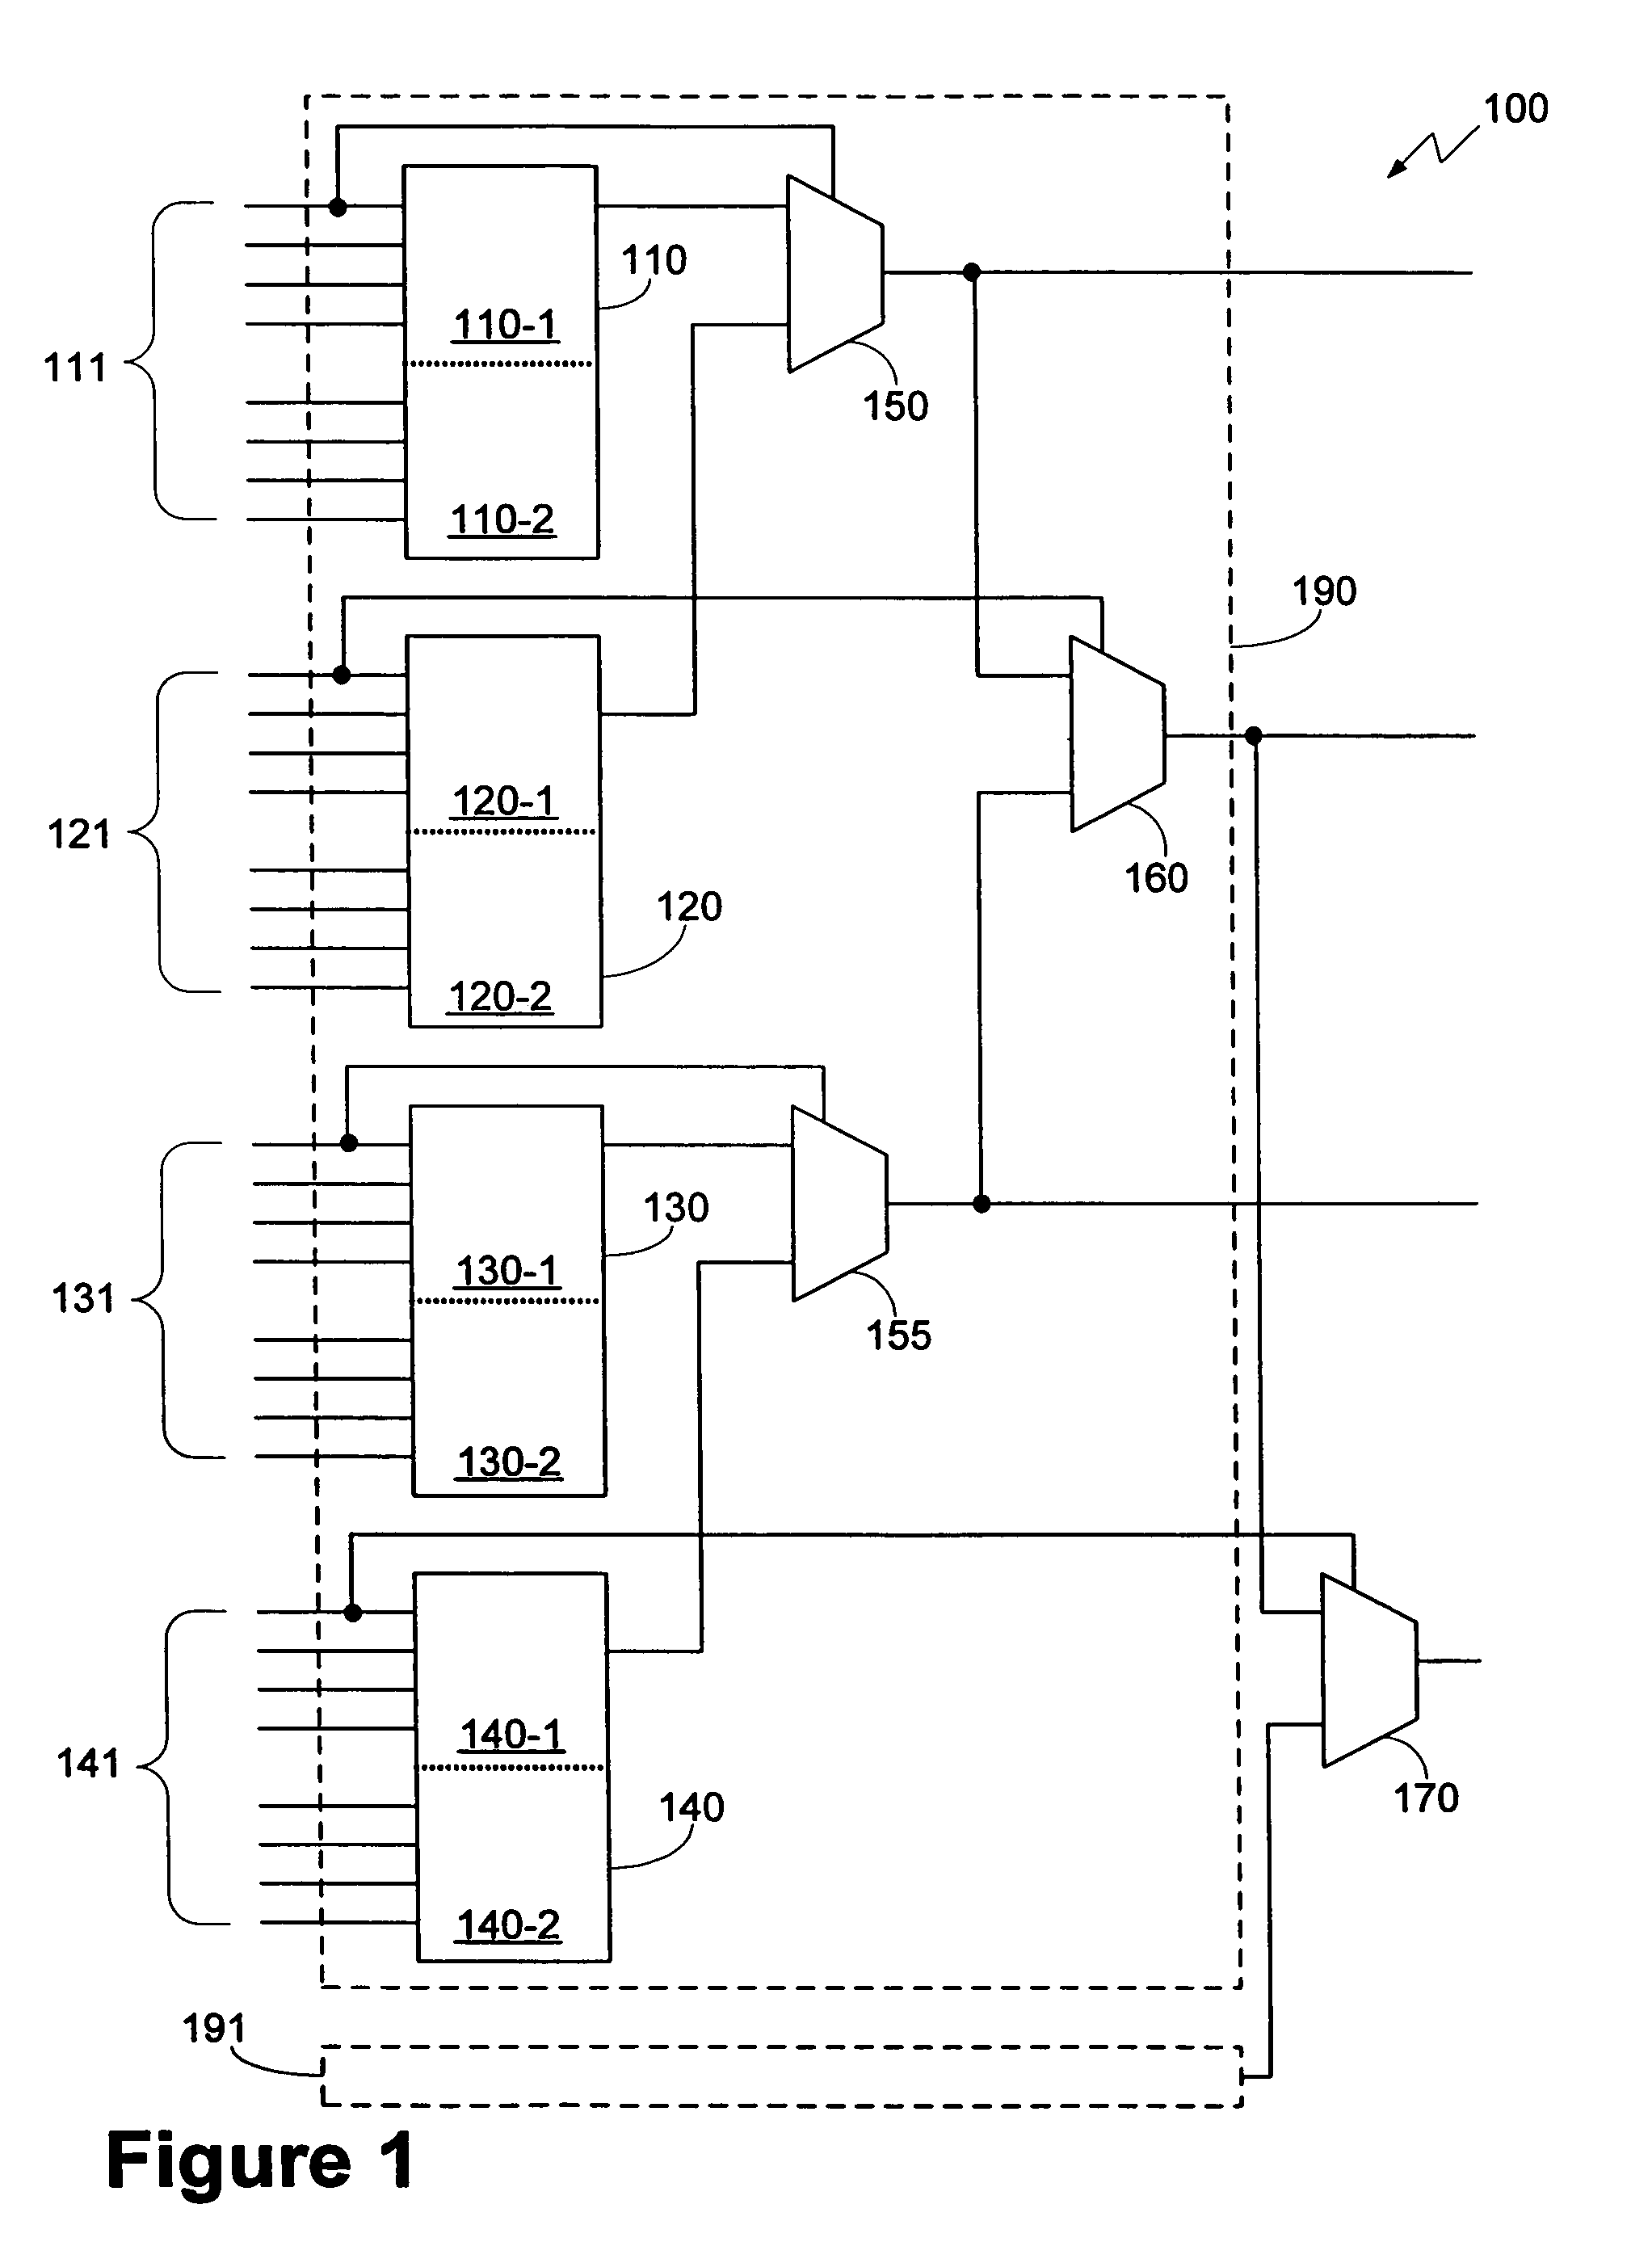 Logic cell with improved multiplexer, barrel shifter, and crossbarring efficiency